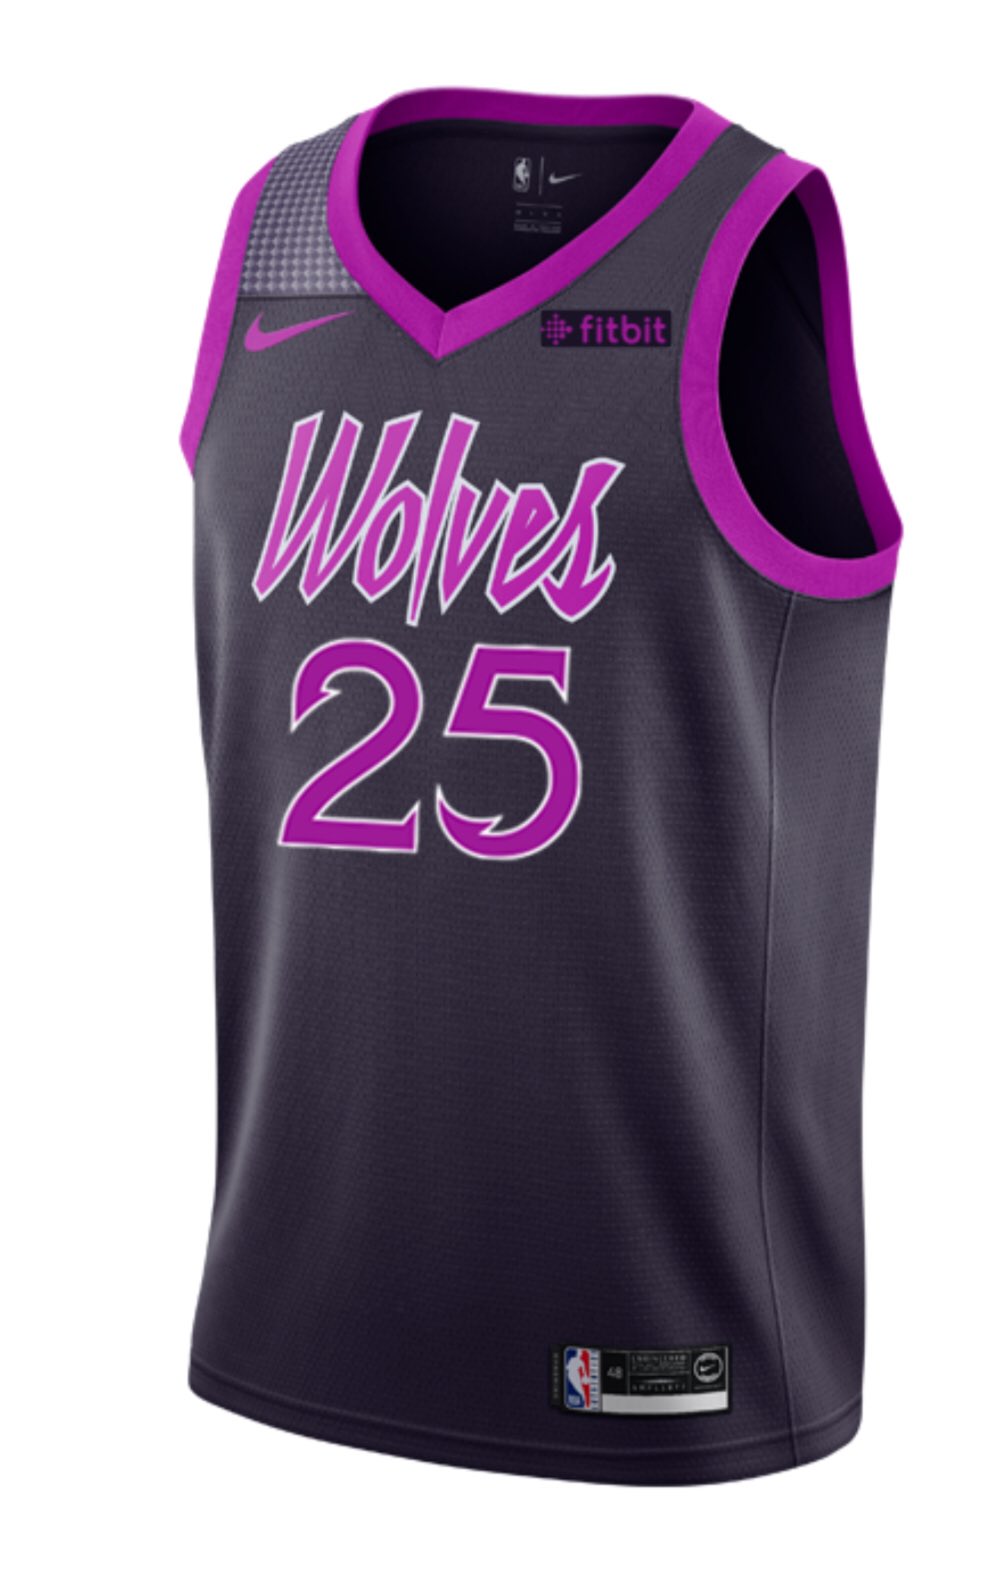 Timberwolves jerseys inspired by Prince leaked in photos - Sports  Illustrated